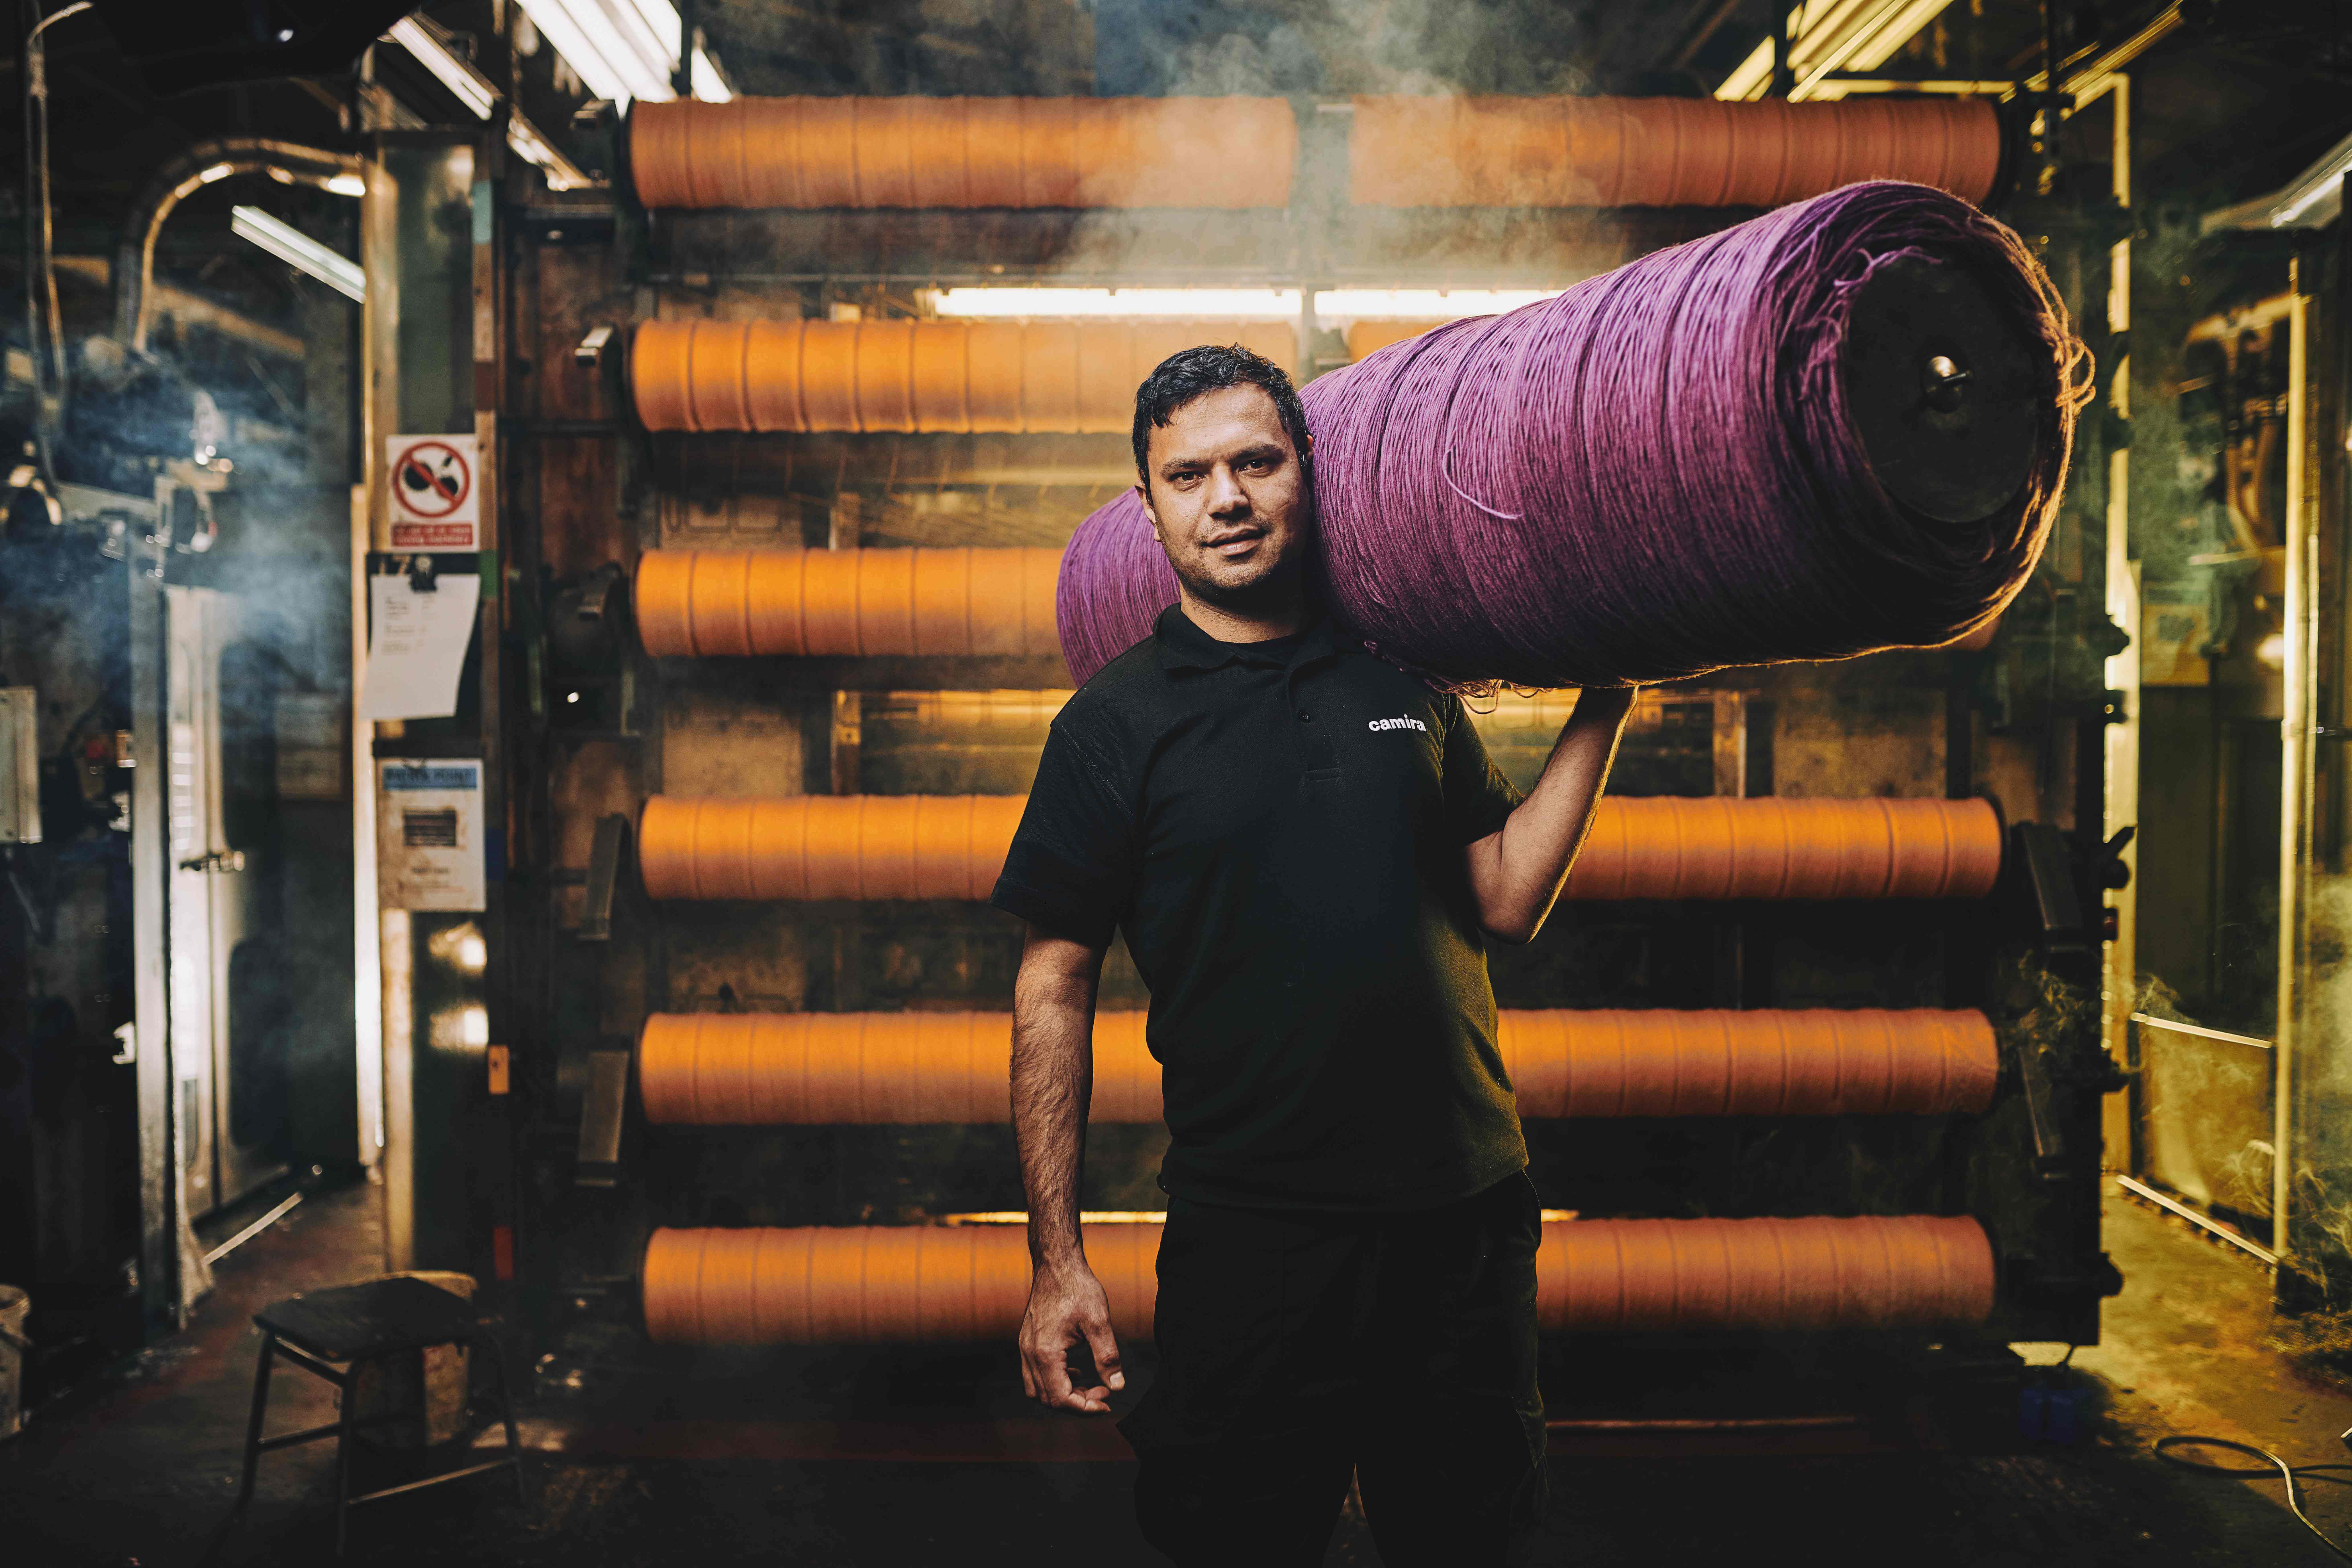 Camira partners with UKFT on £4m recycling project to combat textile waste